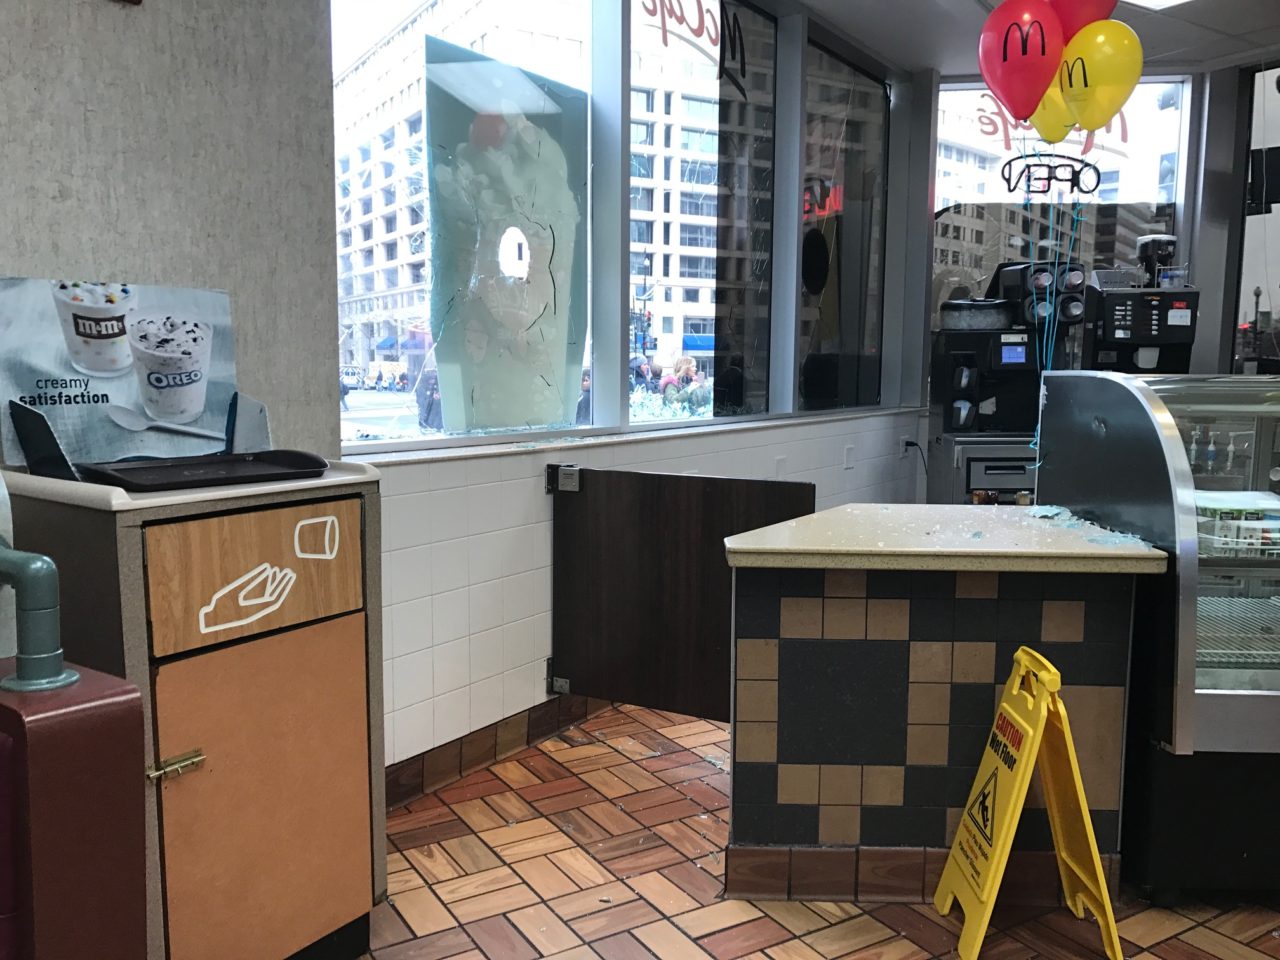 Employees crying inside this McDonald's, where leftist anarchist smashed the window.